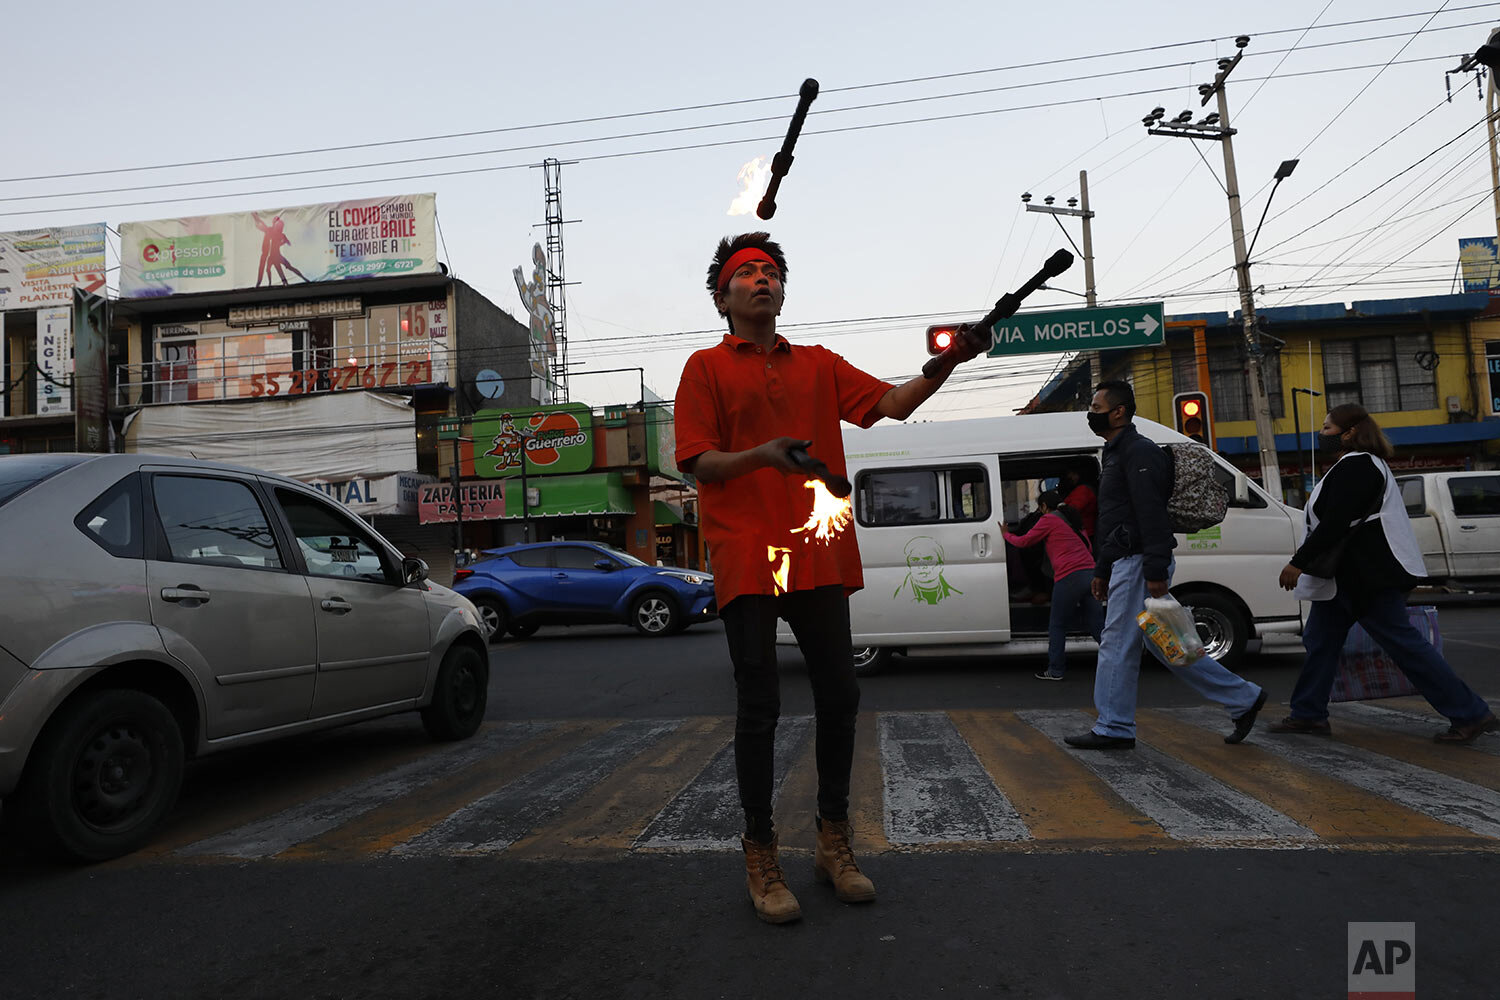  Willian Ramirez Lopez juggles fire to earn tips from passing motorists in Ecatepec, Mexico State, where a state mandate calls for nonessential businesses to close at 5 p.m., to help slow the spread of COVID-19 on the outskirts of Mexico City, Monday